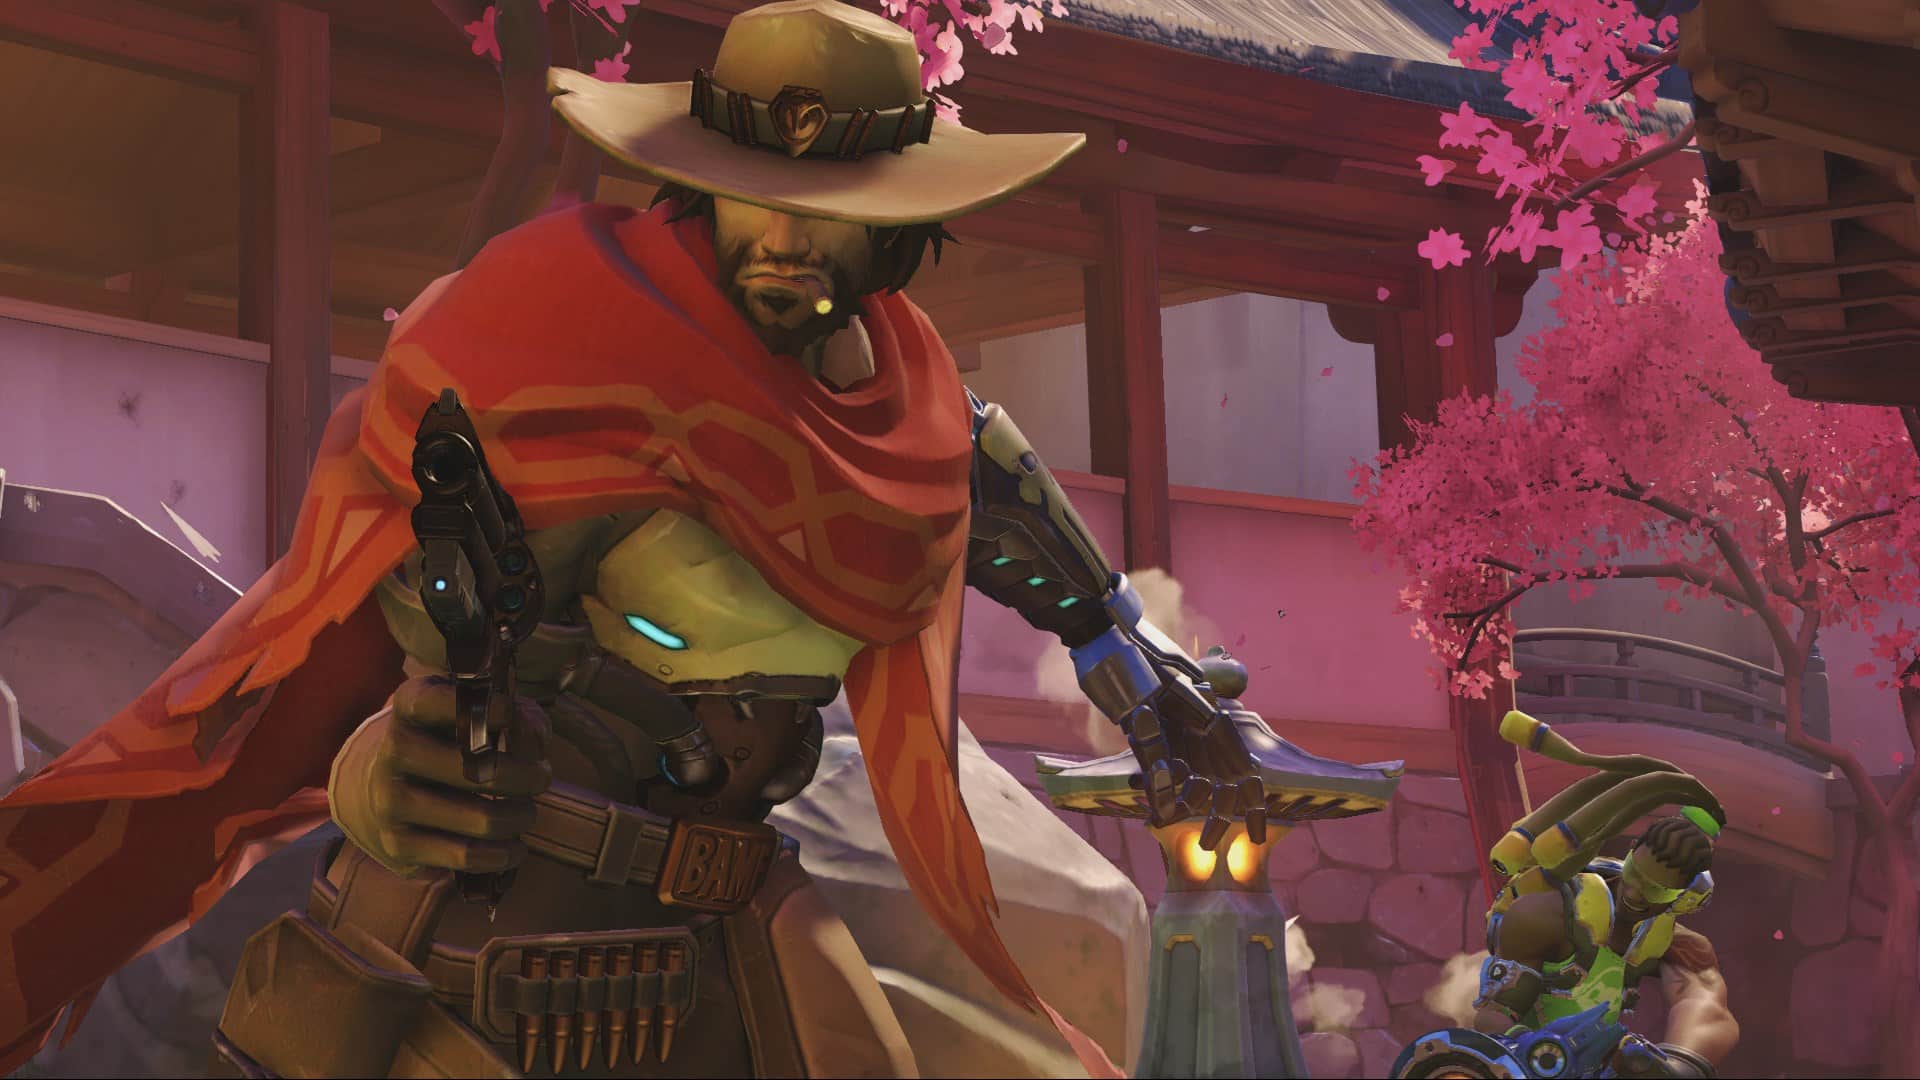 Overwatch cowboy hero fights in a Japanese garden setting